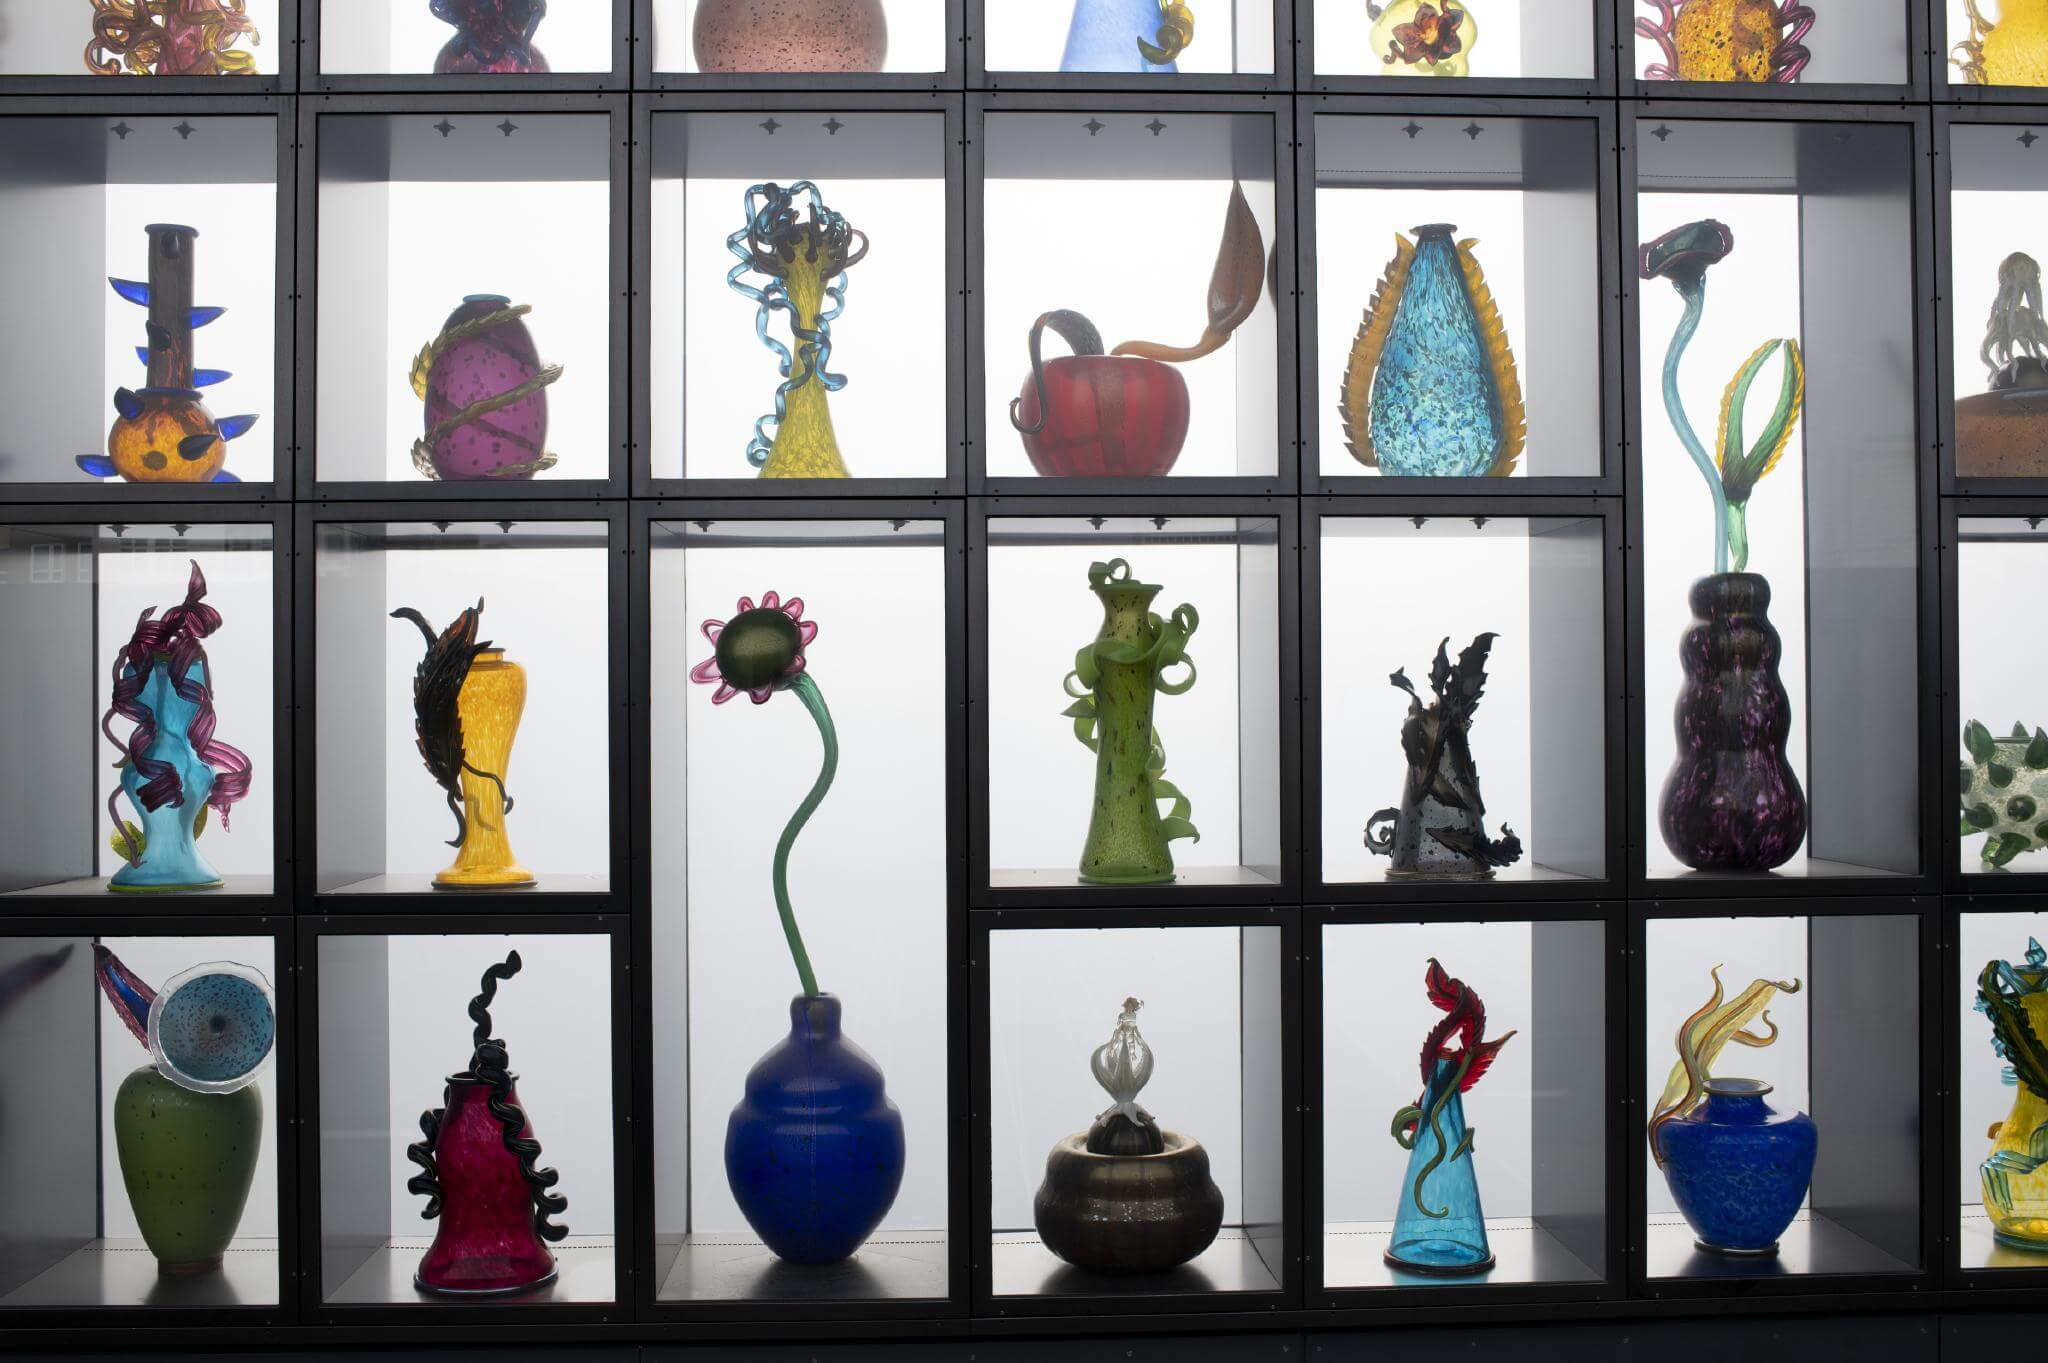 Display at the Museum of Glass in Tacoma. 